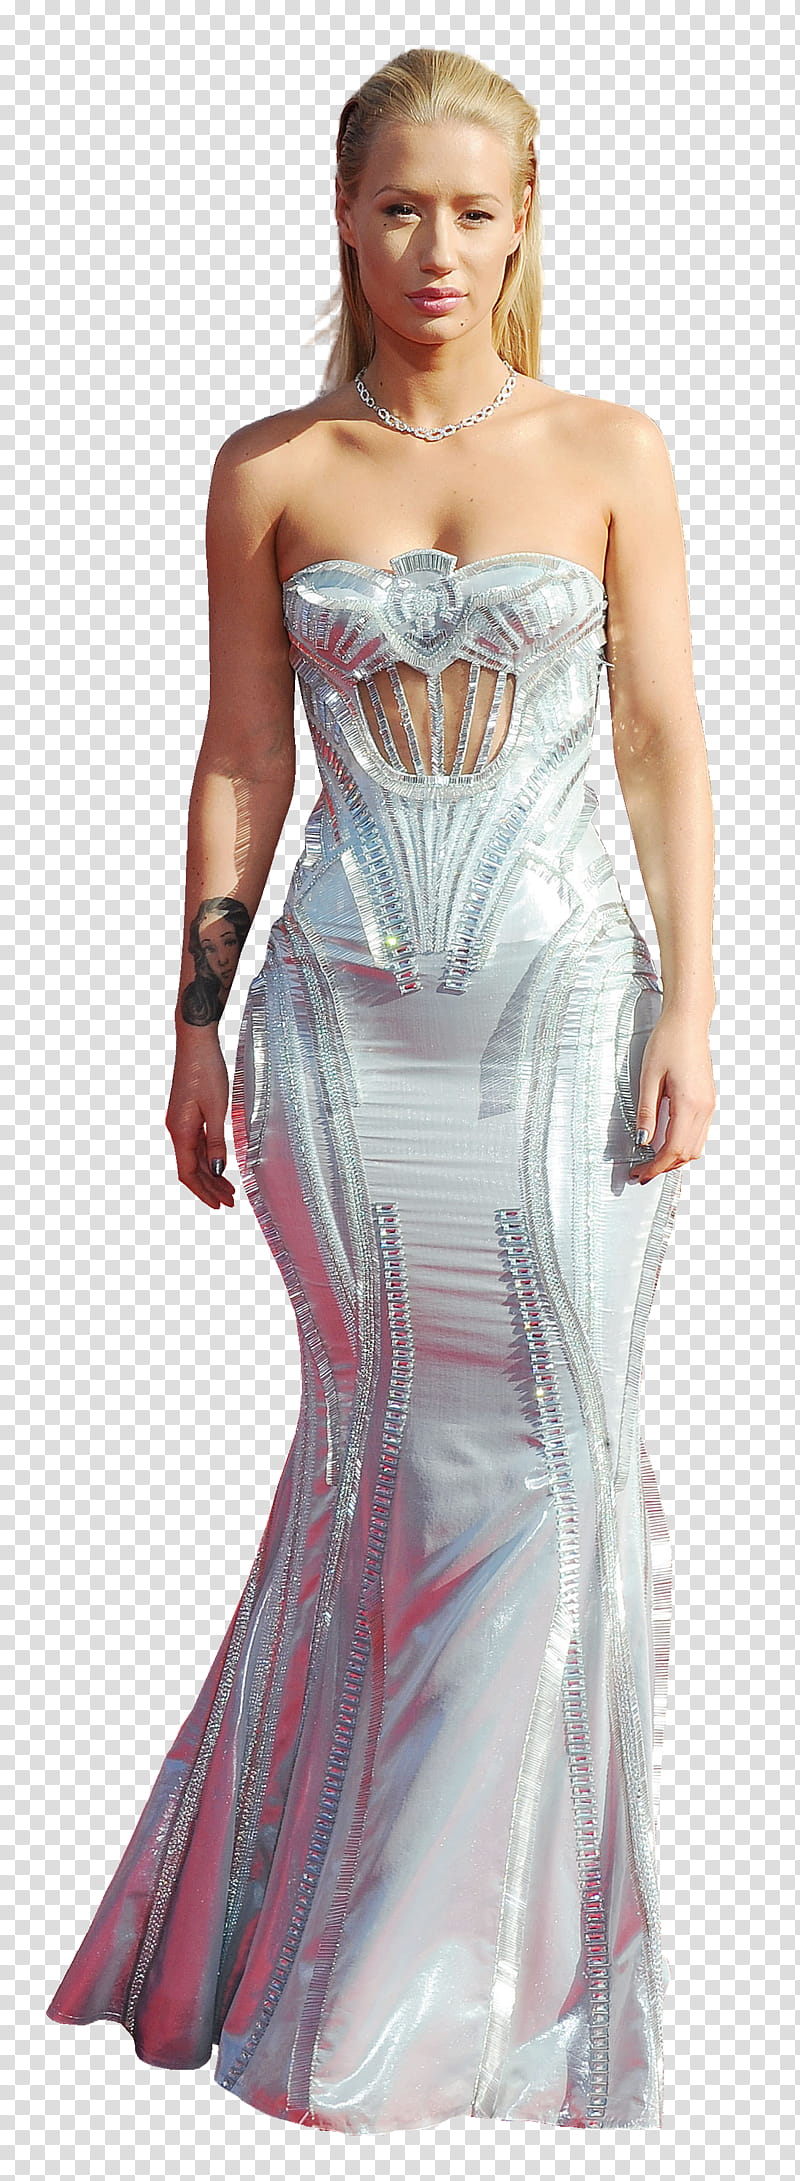 Iggy Azalea, woman standing while putting her hands on side transparent background PNG clipart